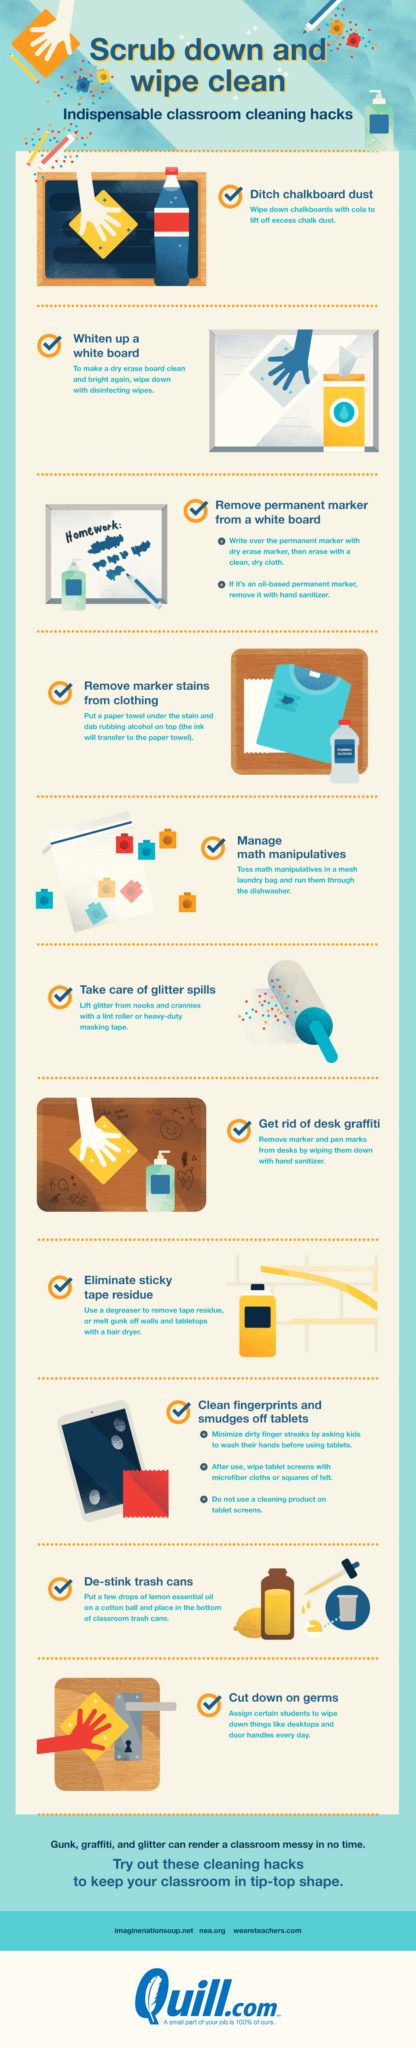 Scrub down and wipe clean - Indispensable Classroom Cleaning Hacks